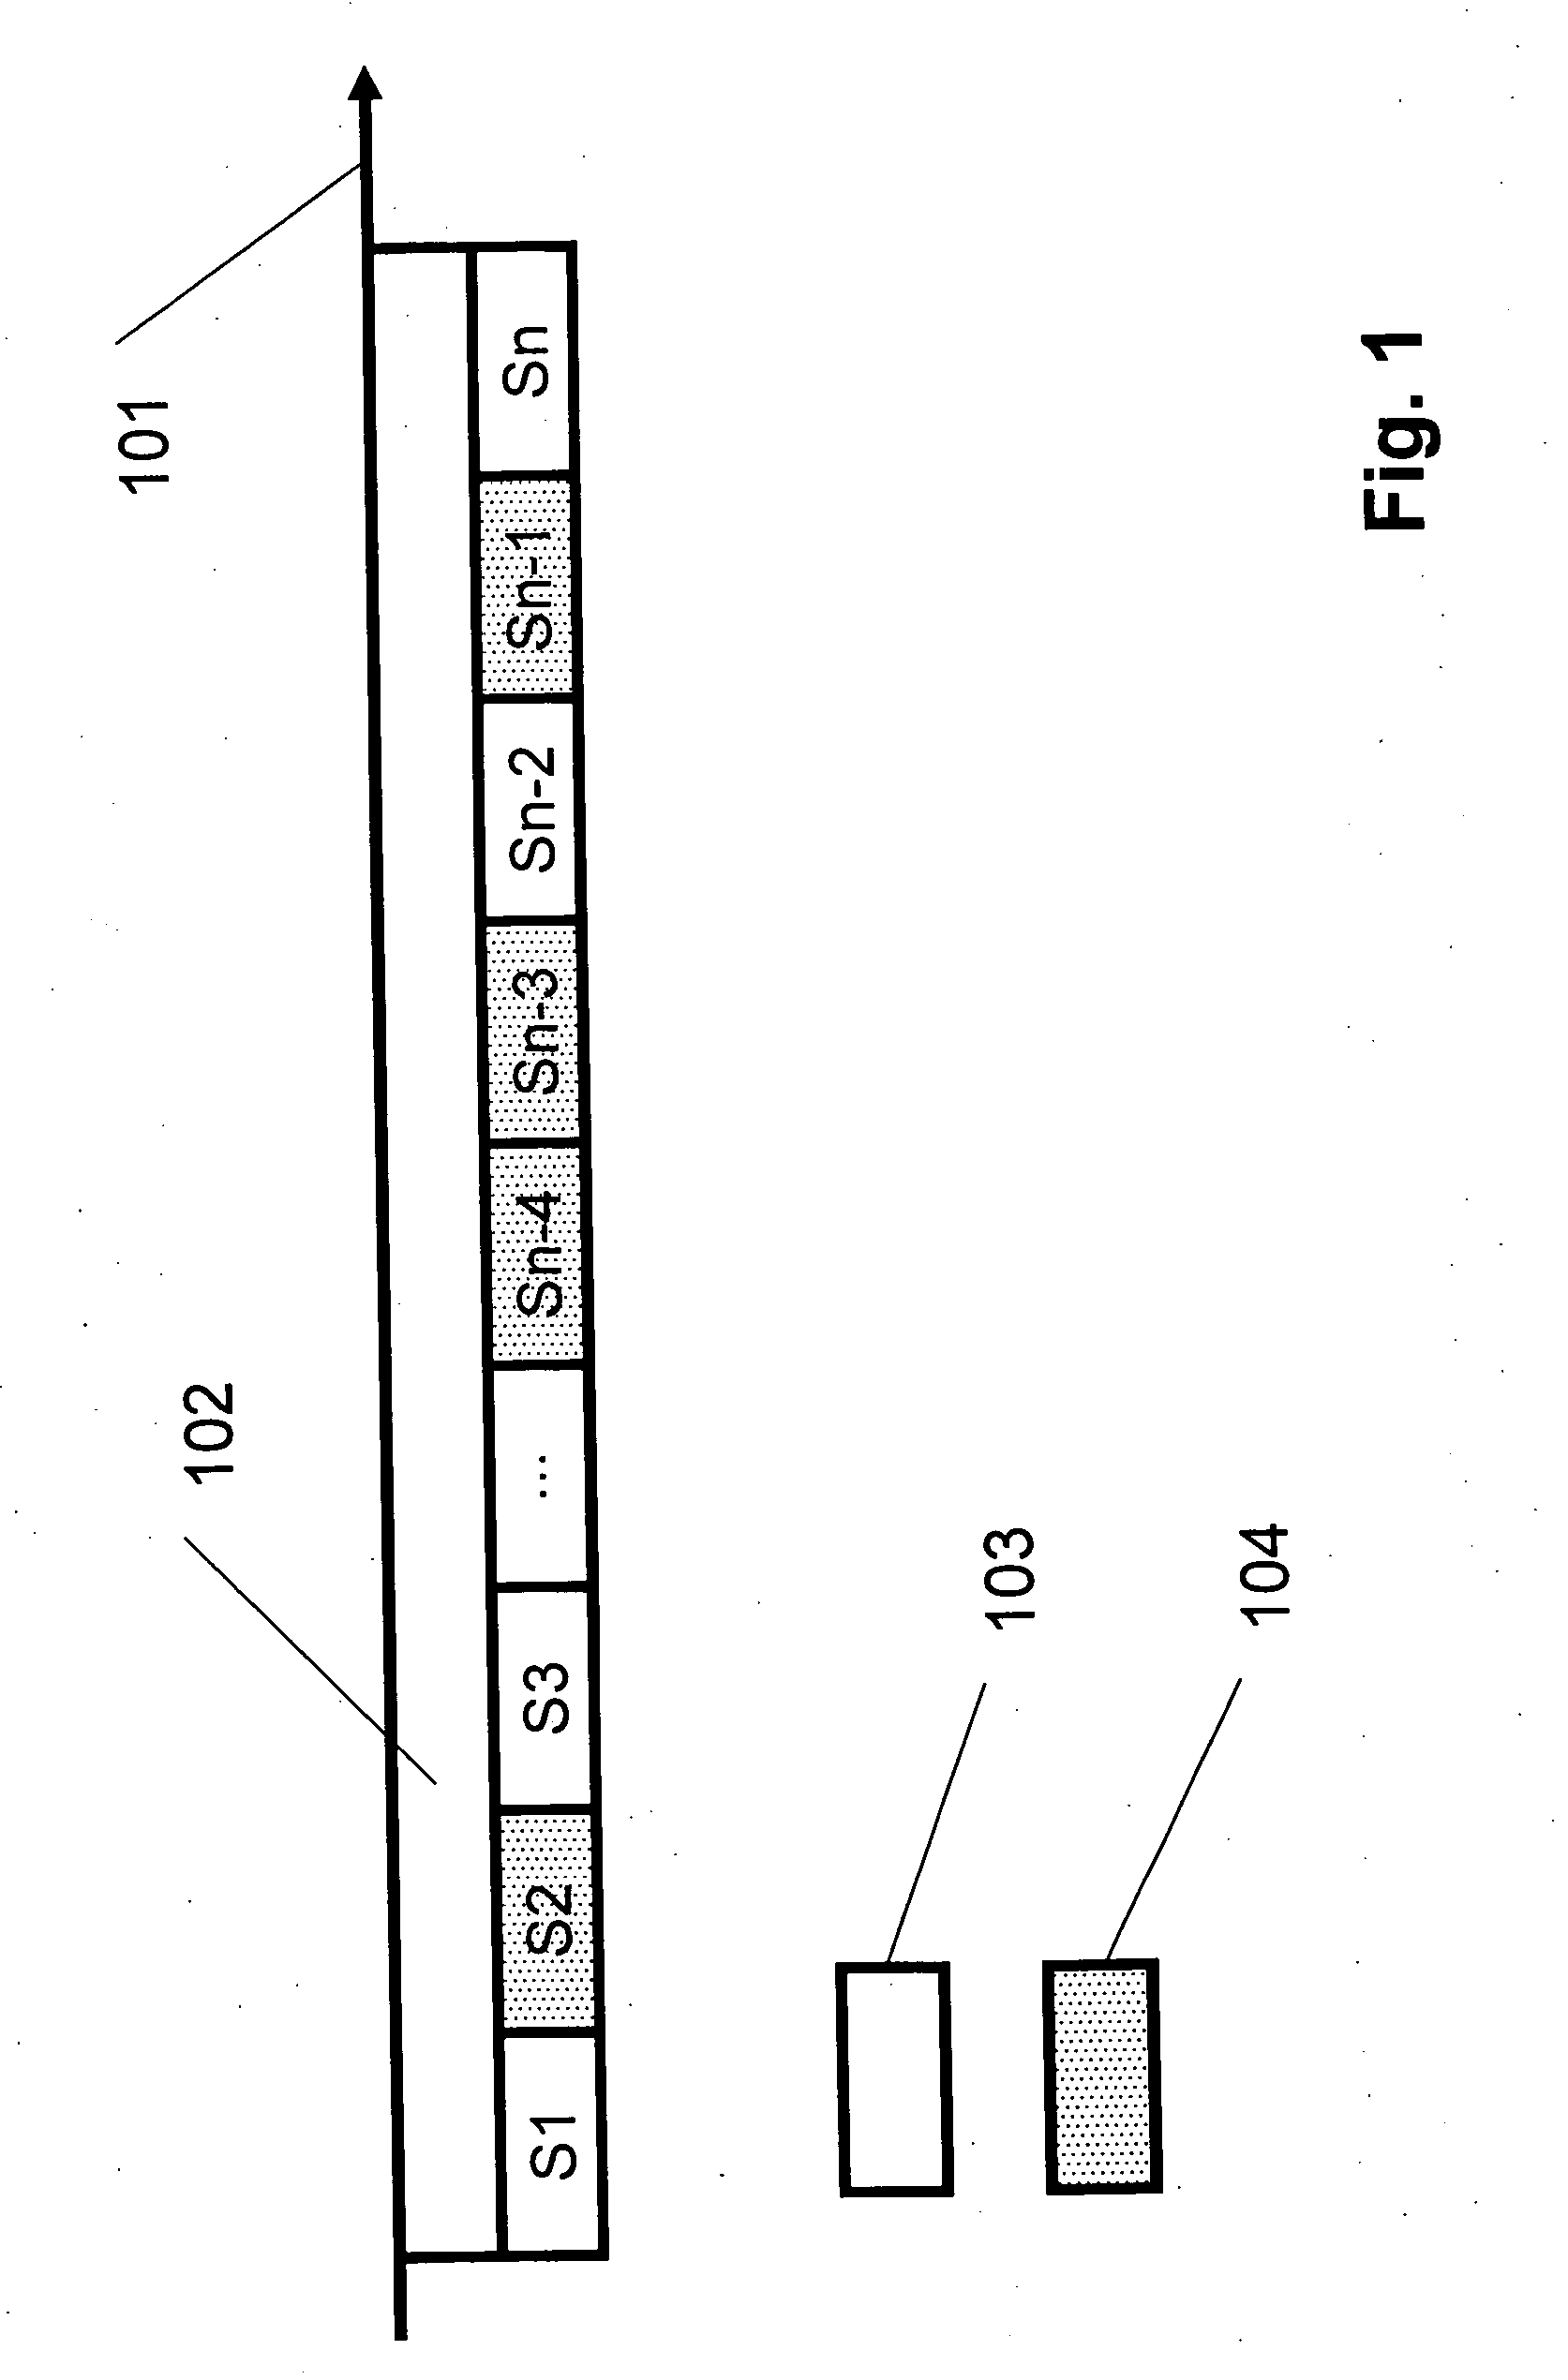 Method and apparatus for managing memory accesses in an AV decoder